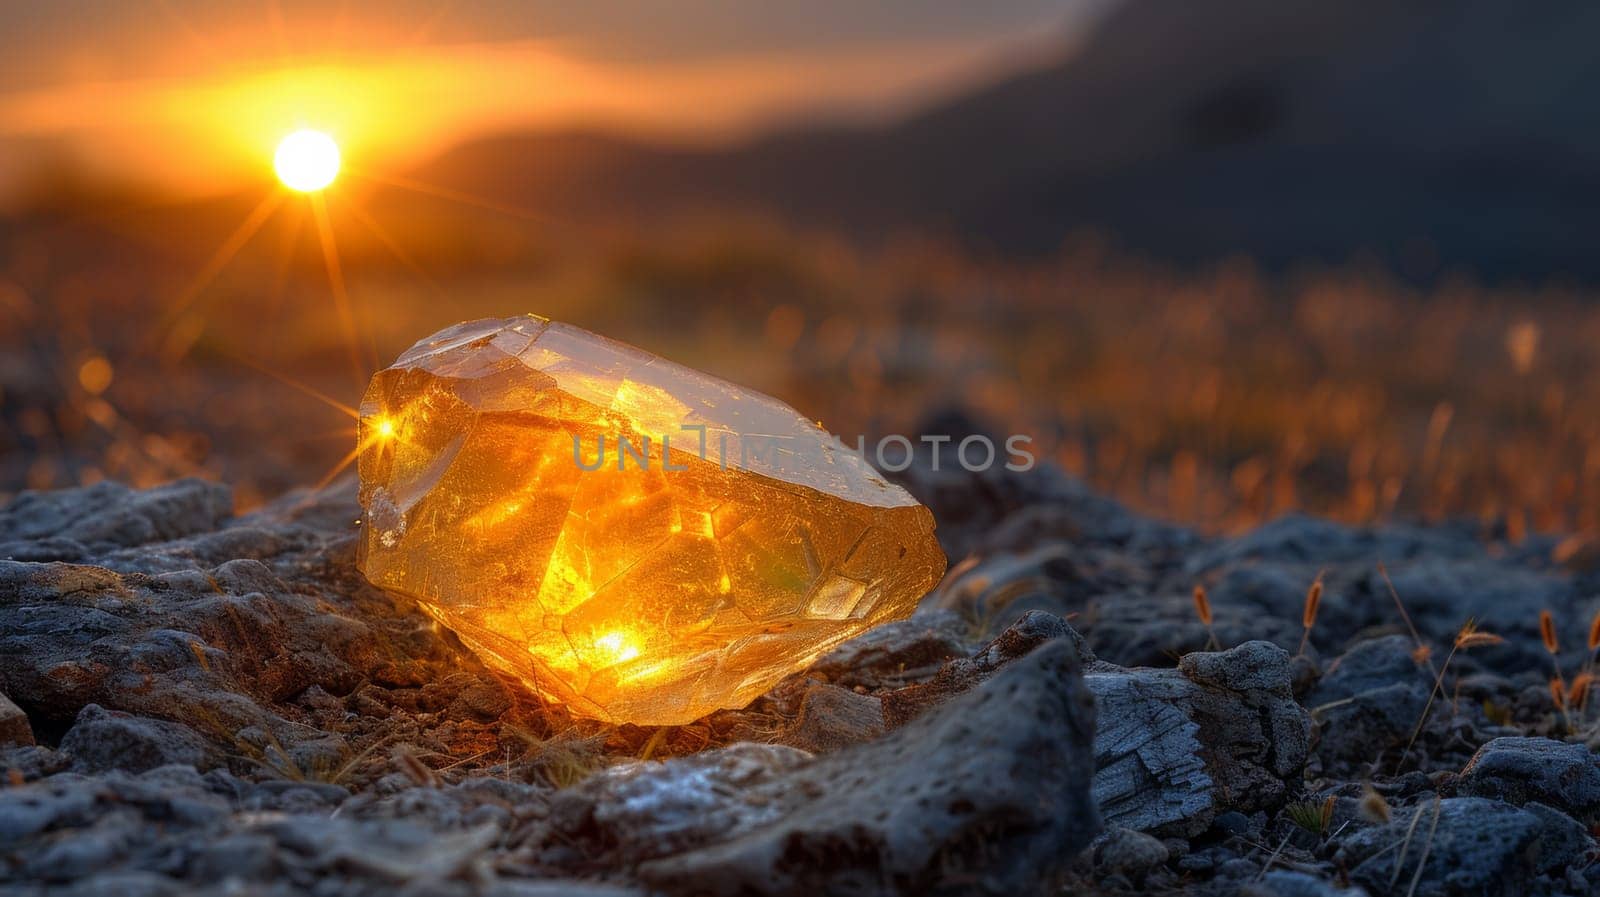 A large rock with a bright light shining on it